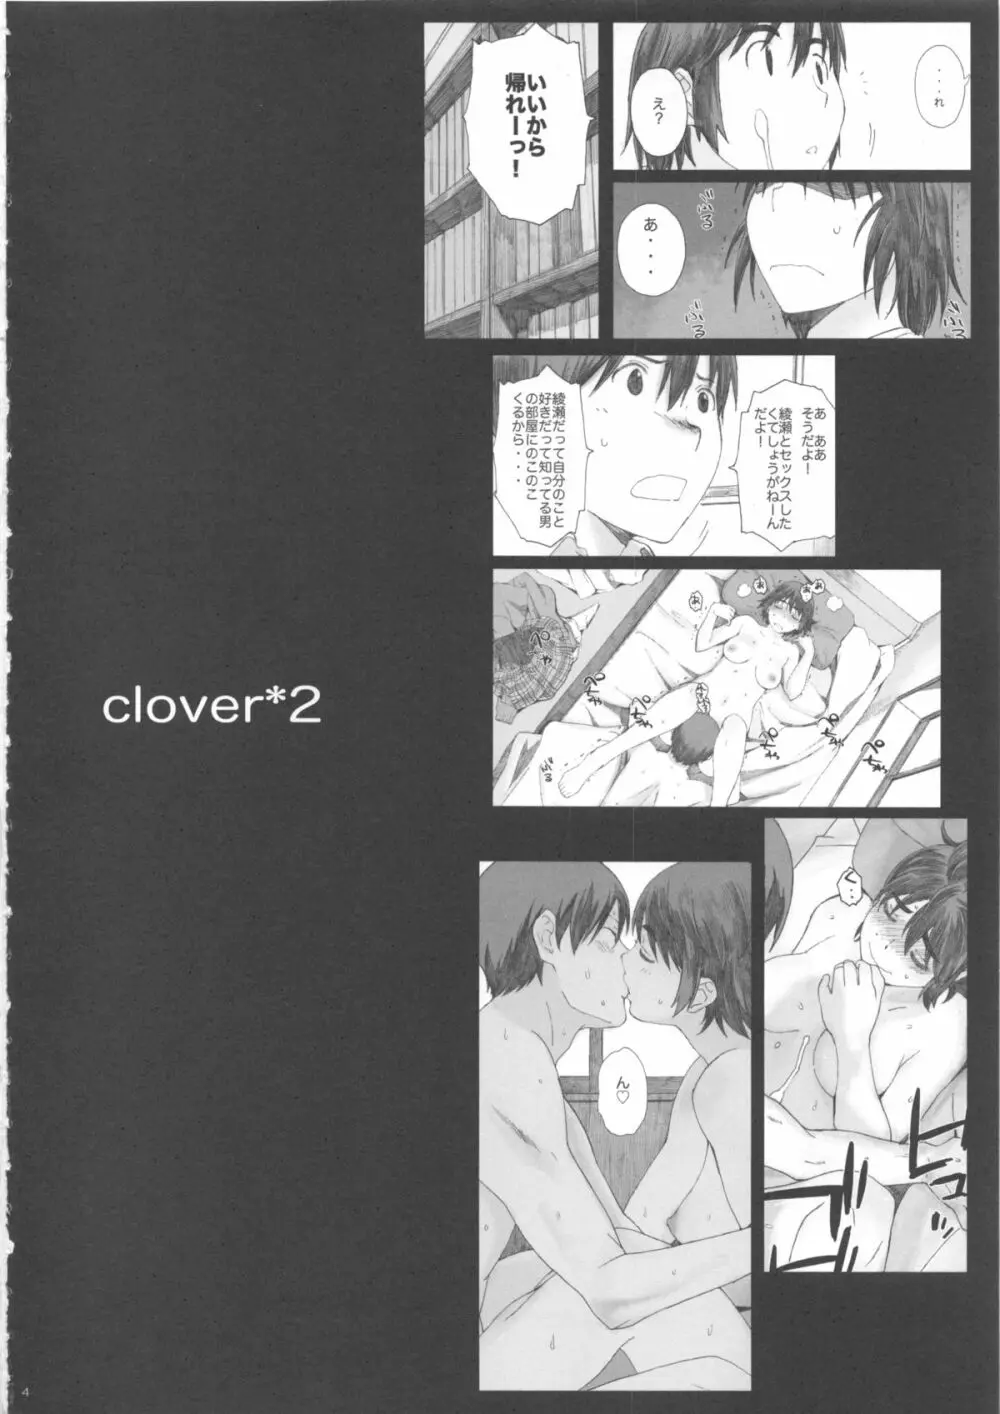 clover＊2 - page4